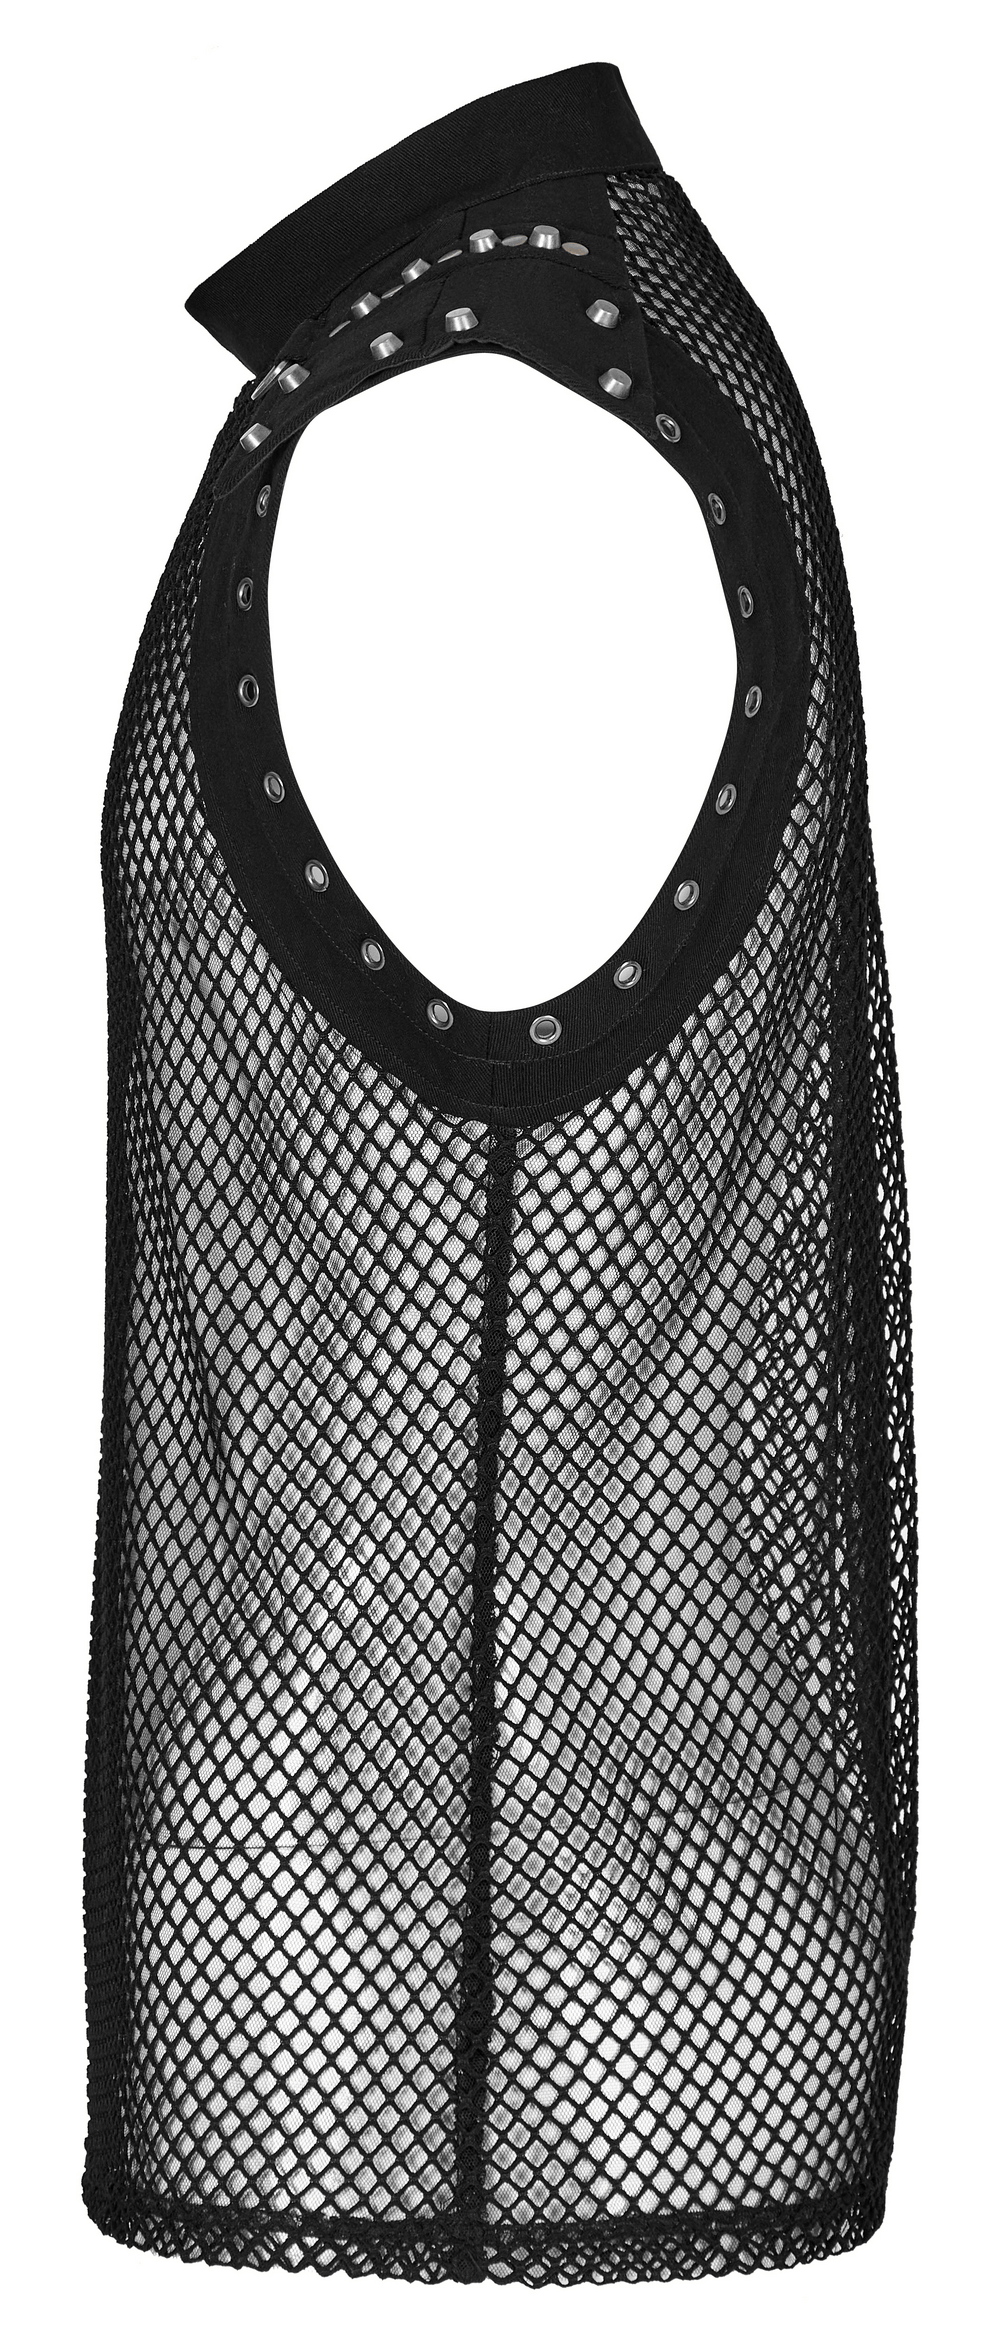 Stylish Men's Mesh Top in Punk Style with Denim Inserts